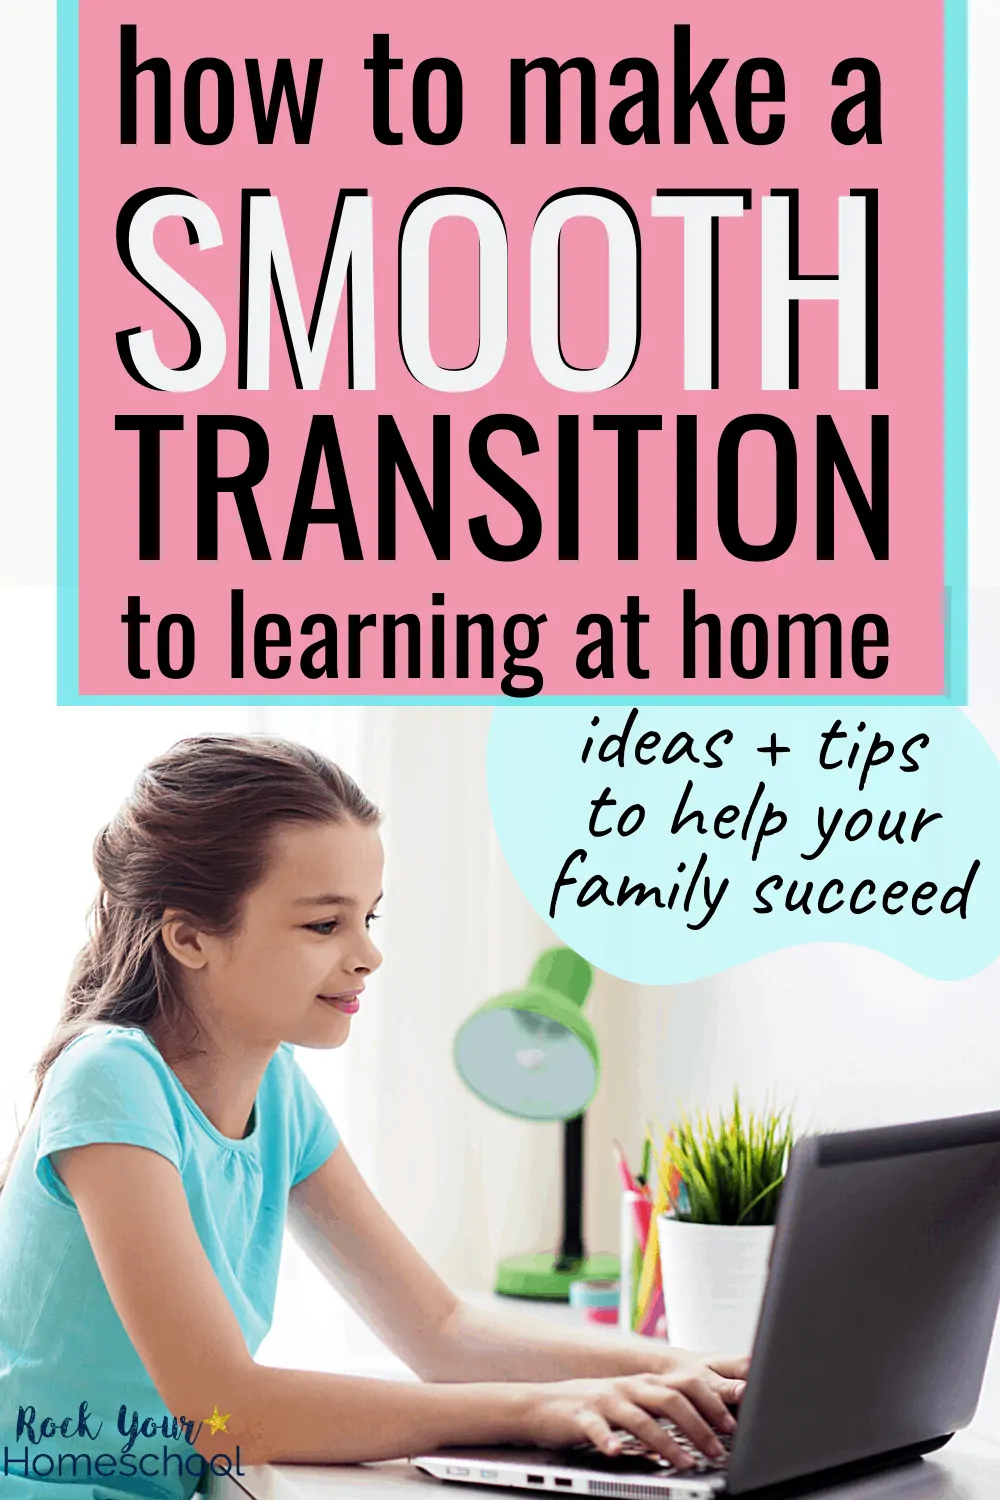 How to Enjoy a Smooth Transition to Learning At Home